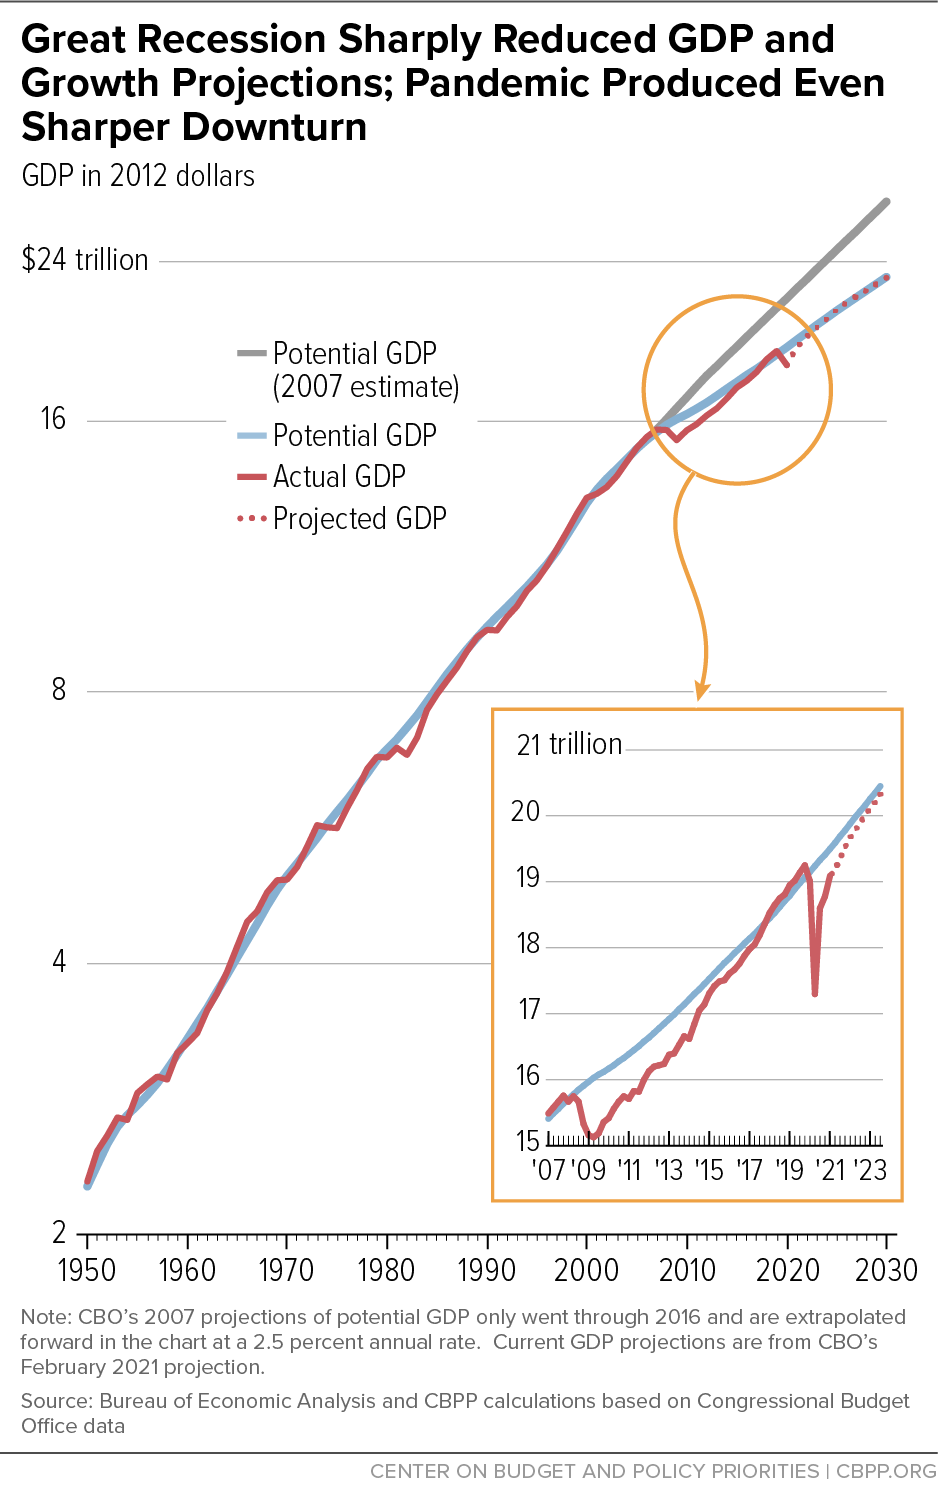 Great Recession Sharply Reduced GDP and Growth Projections; Pandemic Produced Even Sharper Downturn